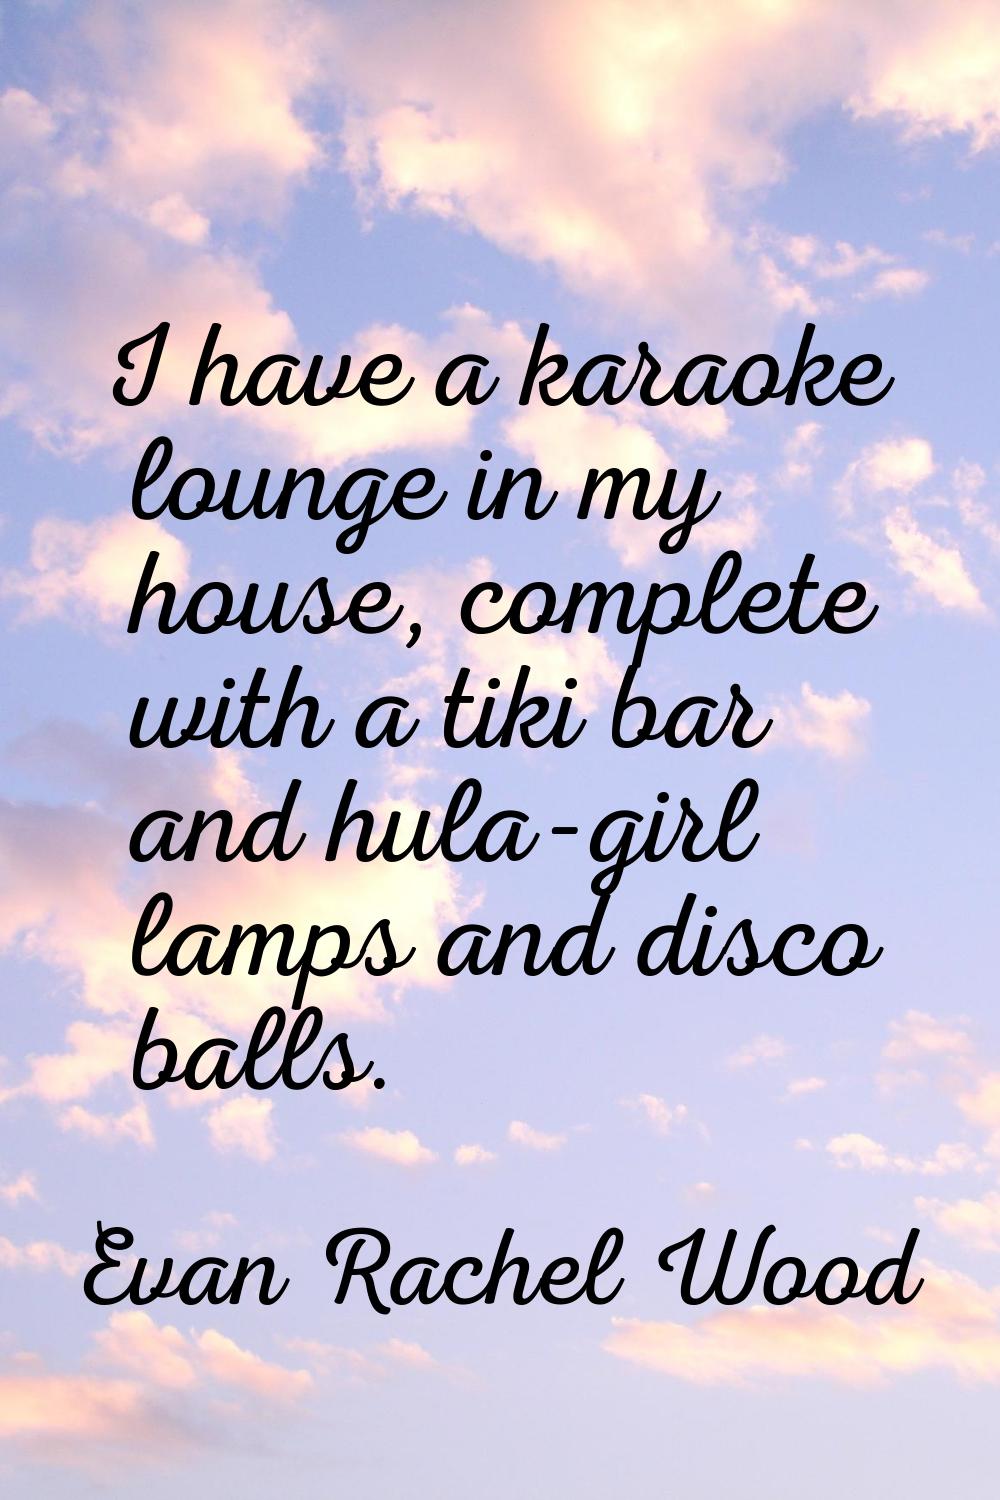 I have a karaoke lounge in my house, complete with a tiki bar and hula-girl lamps and disco balls.